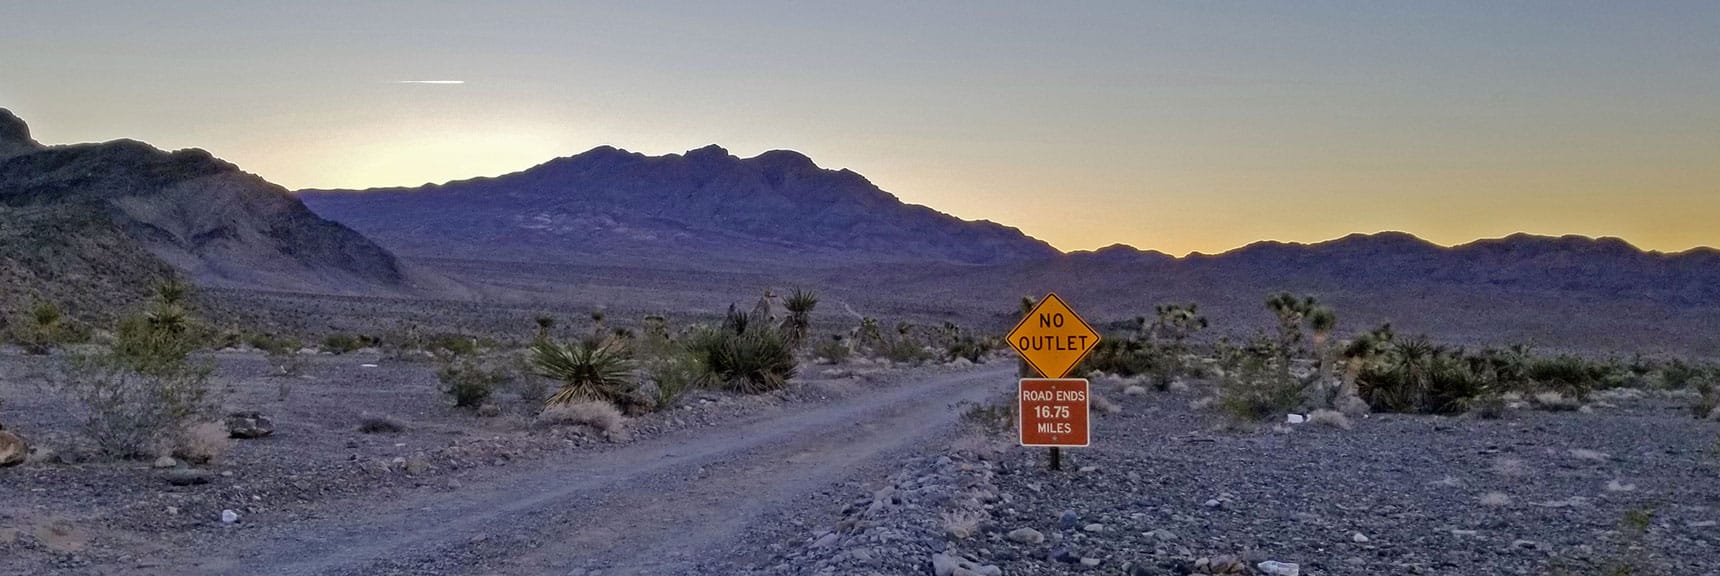 Connecting with Gass Peak Road After Traversing Some Wilderness. Gass Peak Trailhead Should Be About 8 Miles. There IS Possibly an Outlet for 4WDs! | Gass Peak Grand Crossing | Desert National Wildlife Refuge to Centennial Hills Las Vegas via Gass Peak Summit by Foot